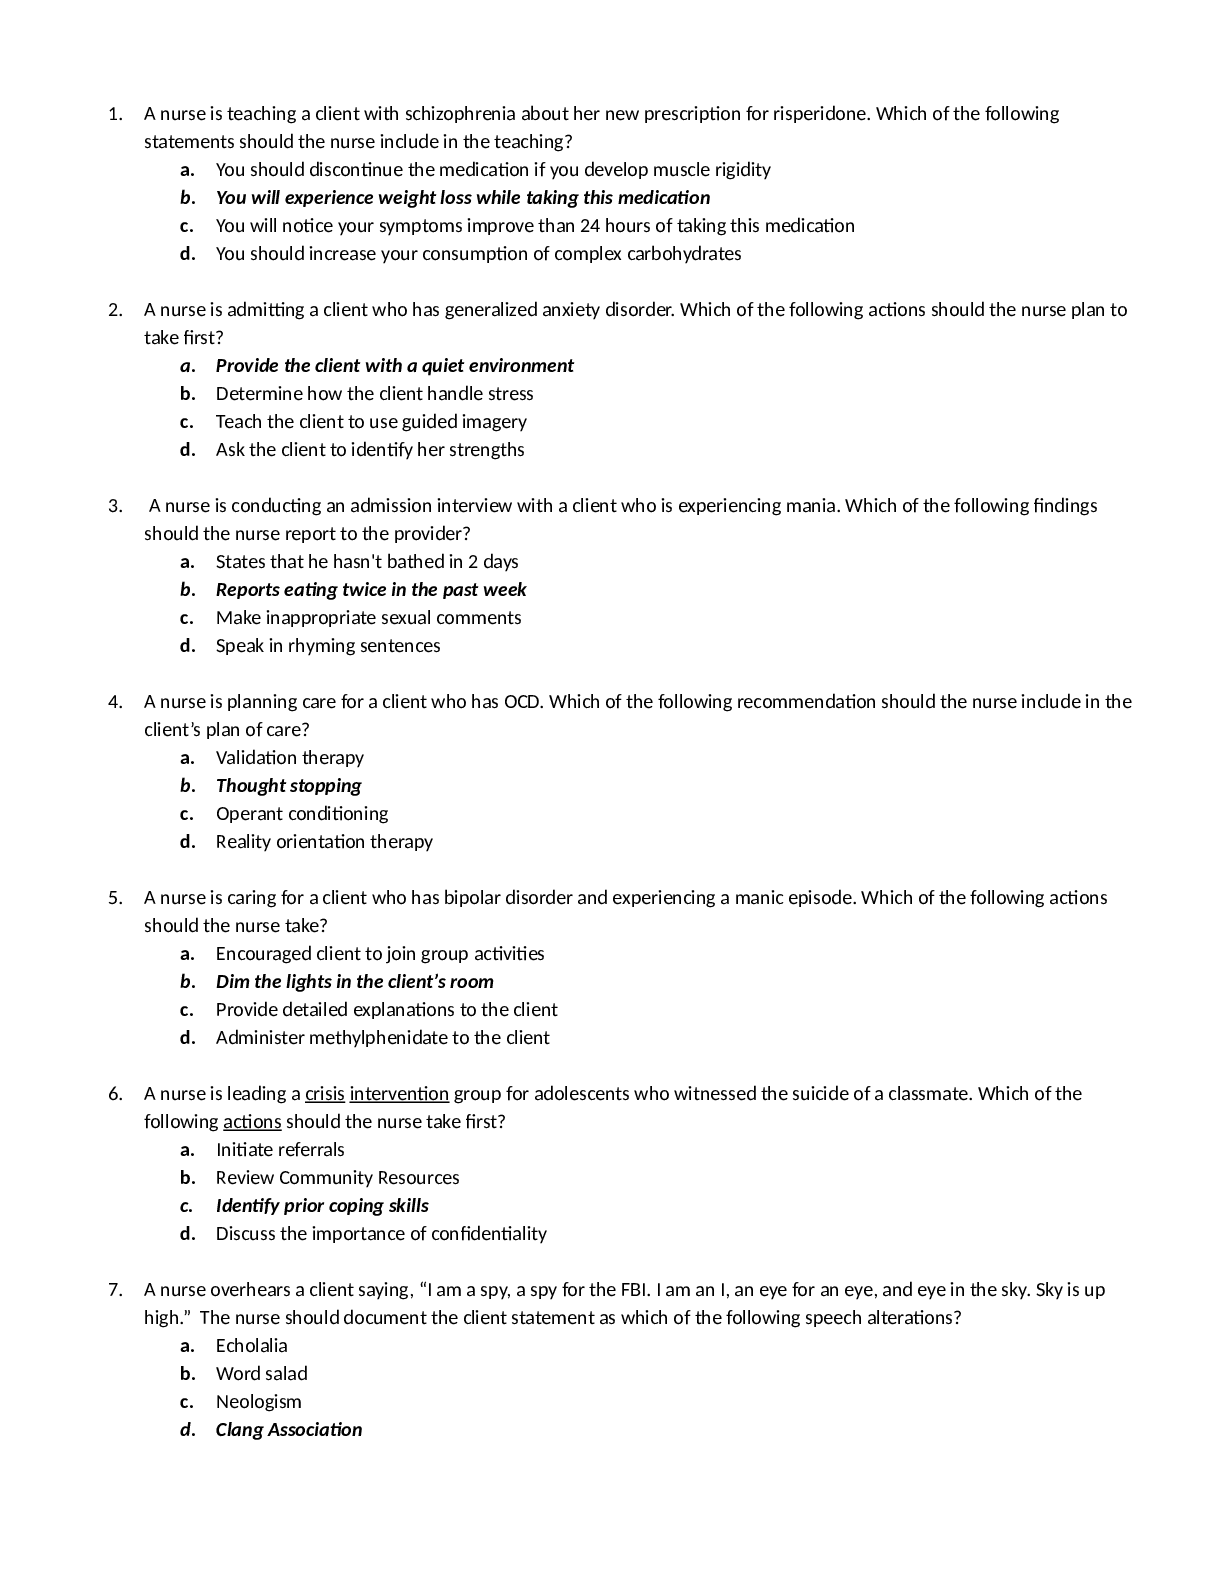 ATI MENTAL HEALTH A 2019 PROCTORED EXAM REVISION QUESTIONS AND ANSWERS(CORRECT)